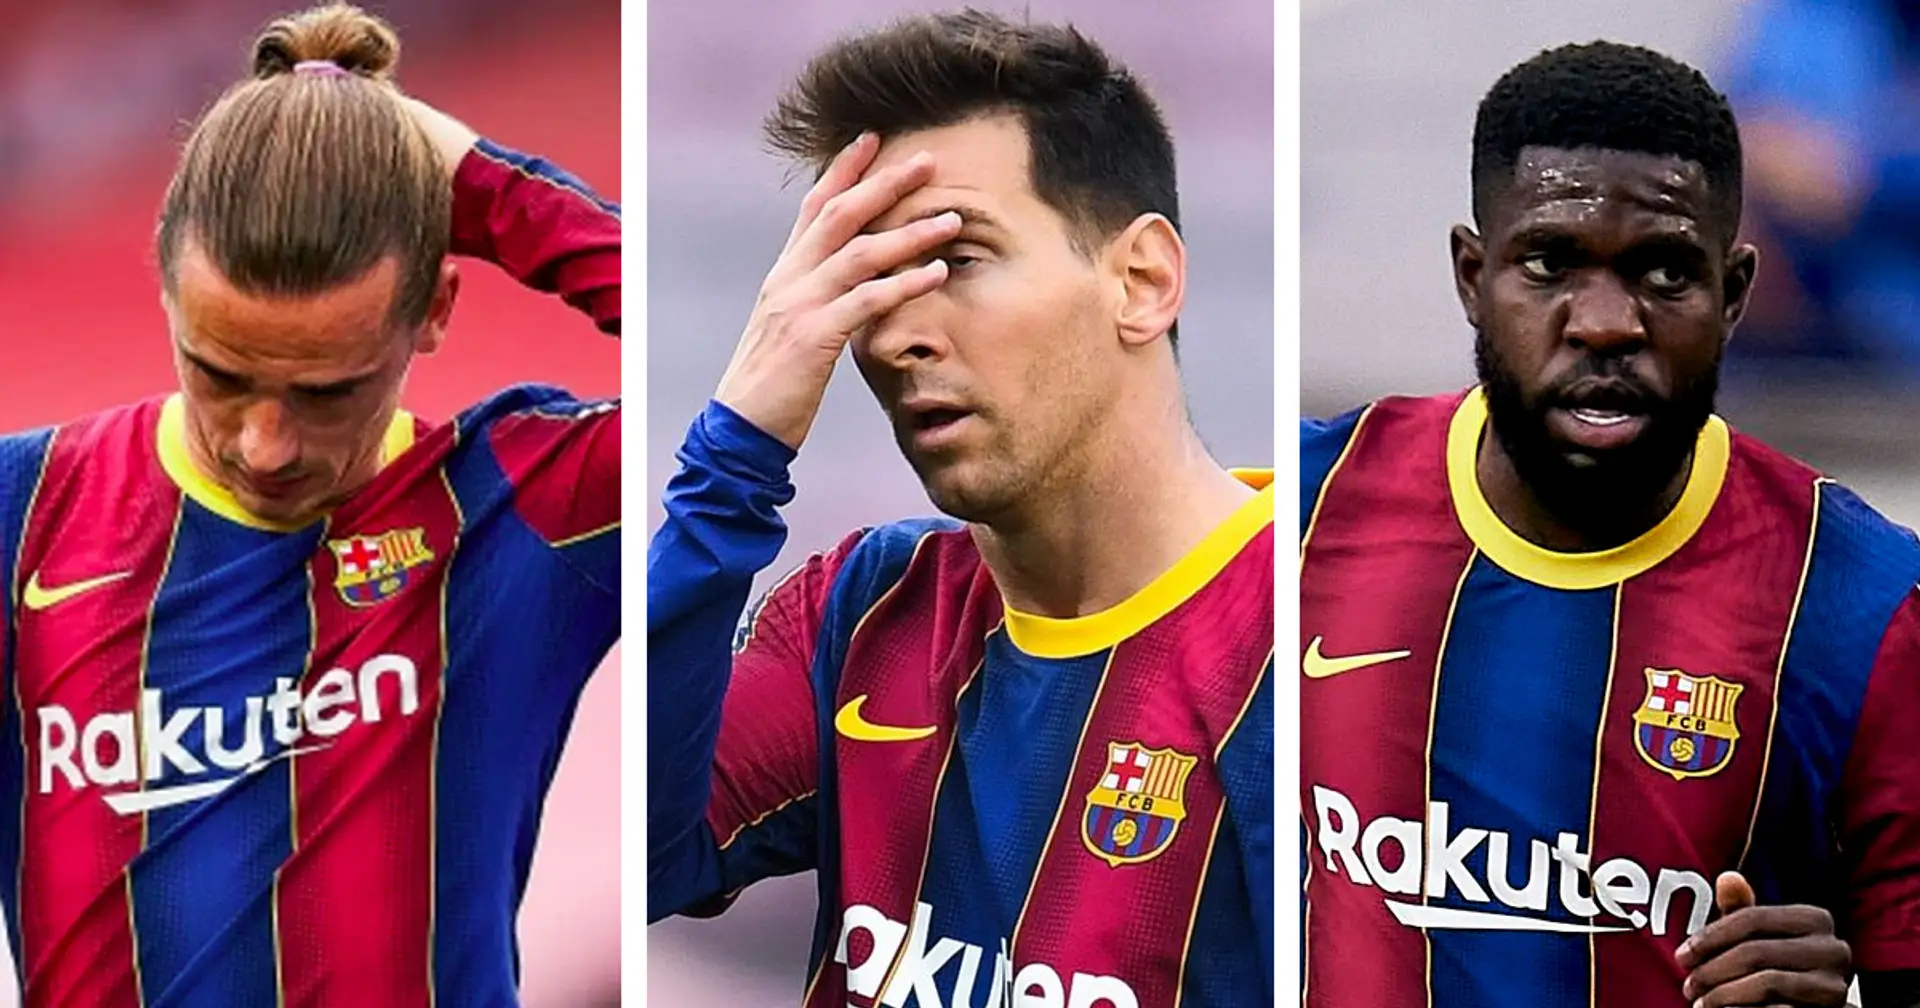 Crucial update on Messi, Griezmann exit links, new signing announced: Latest Barca transfer round-up with probability ratings